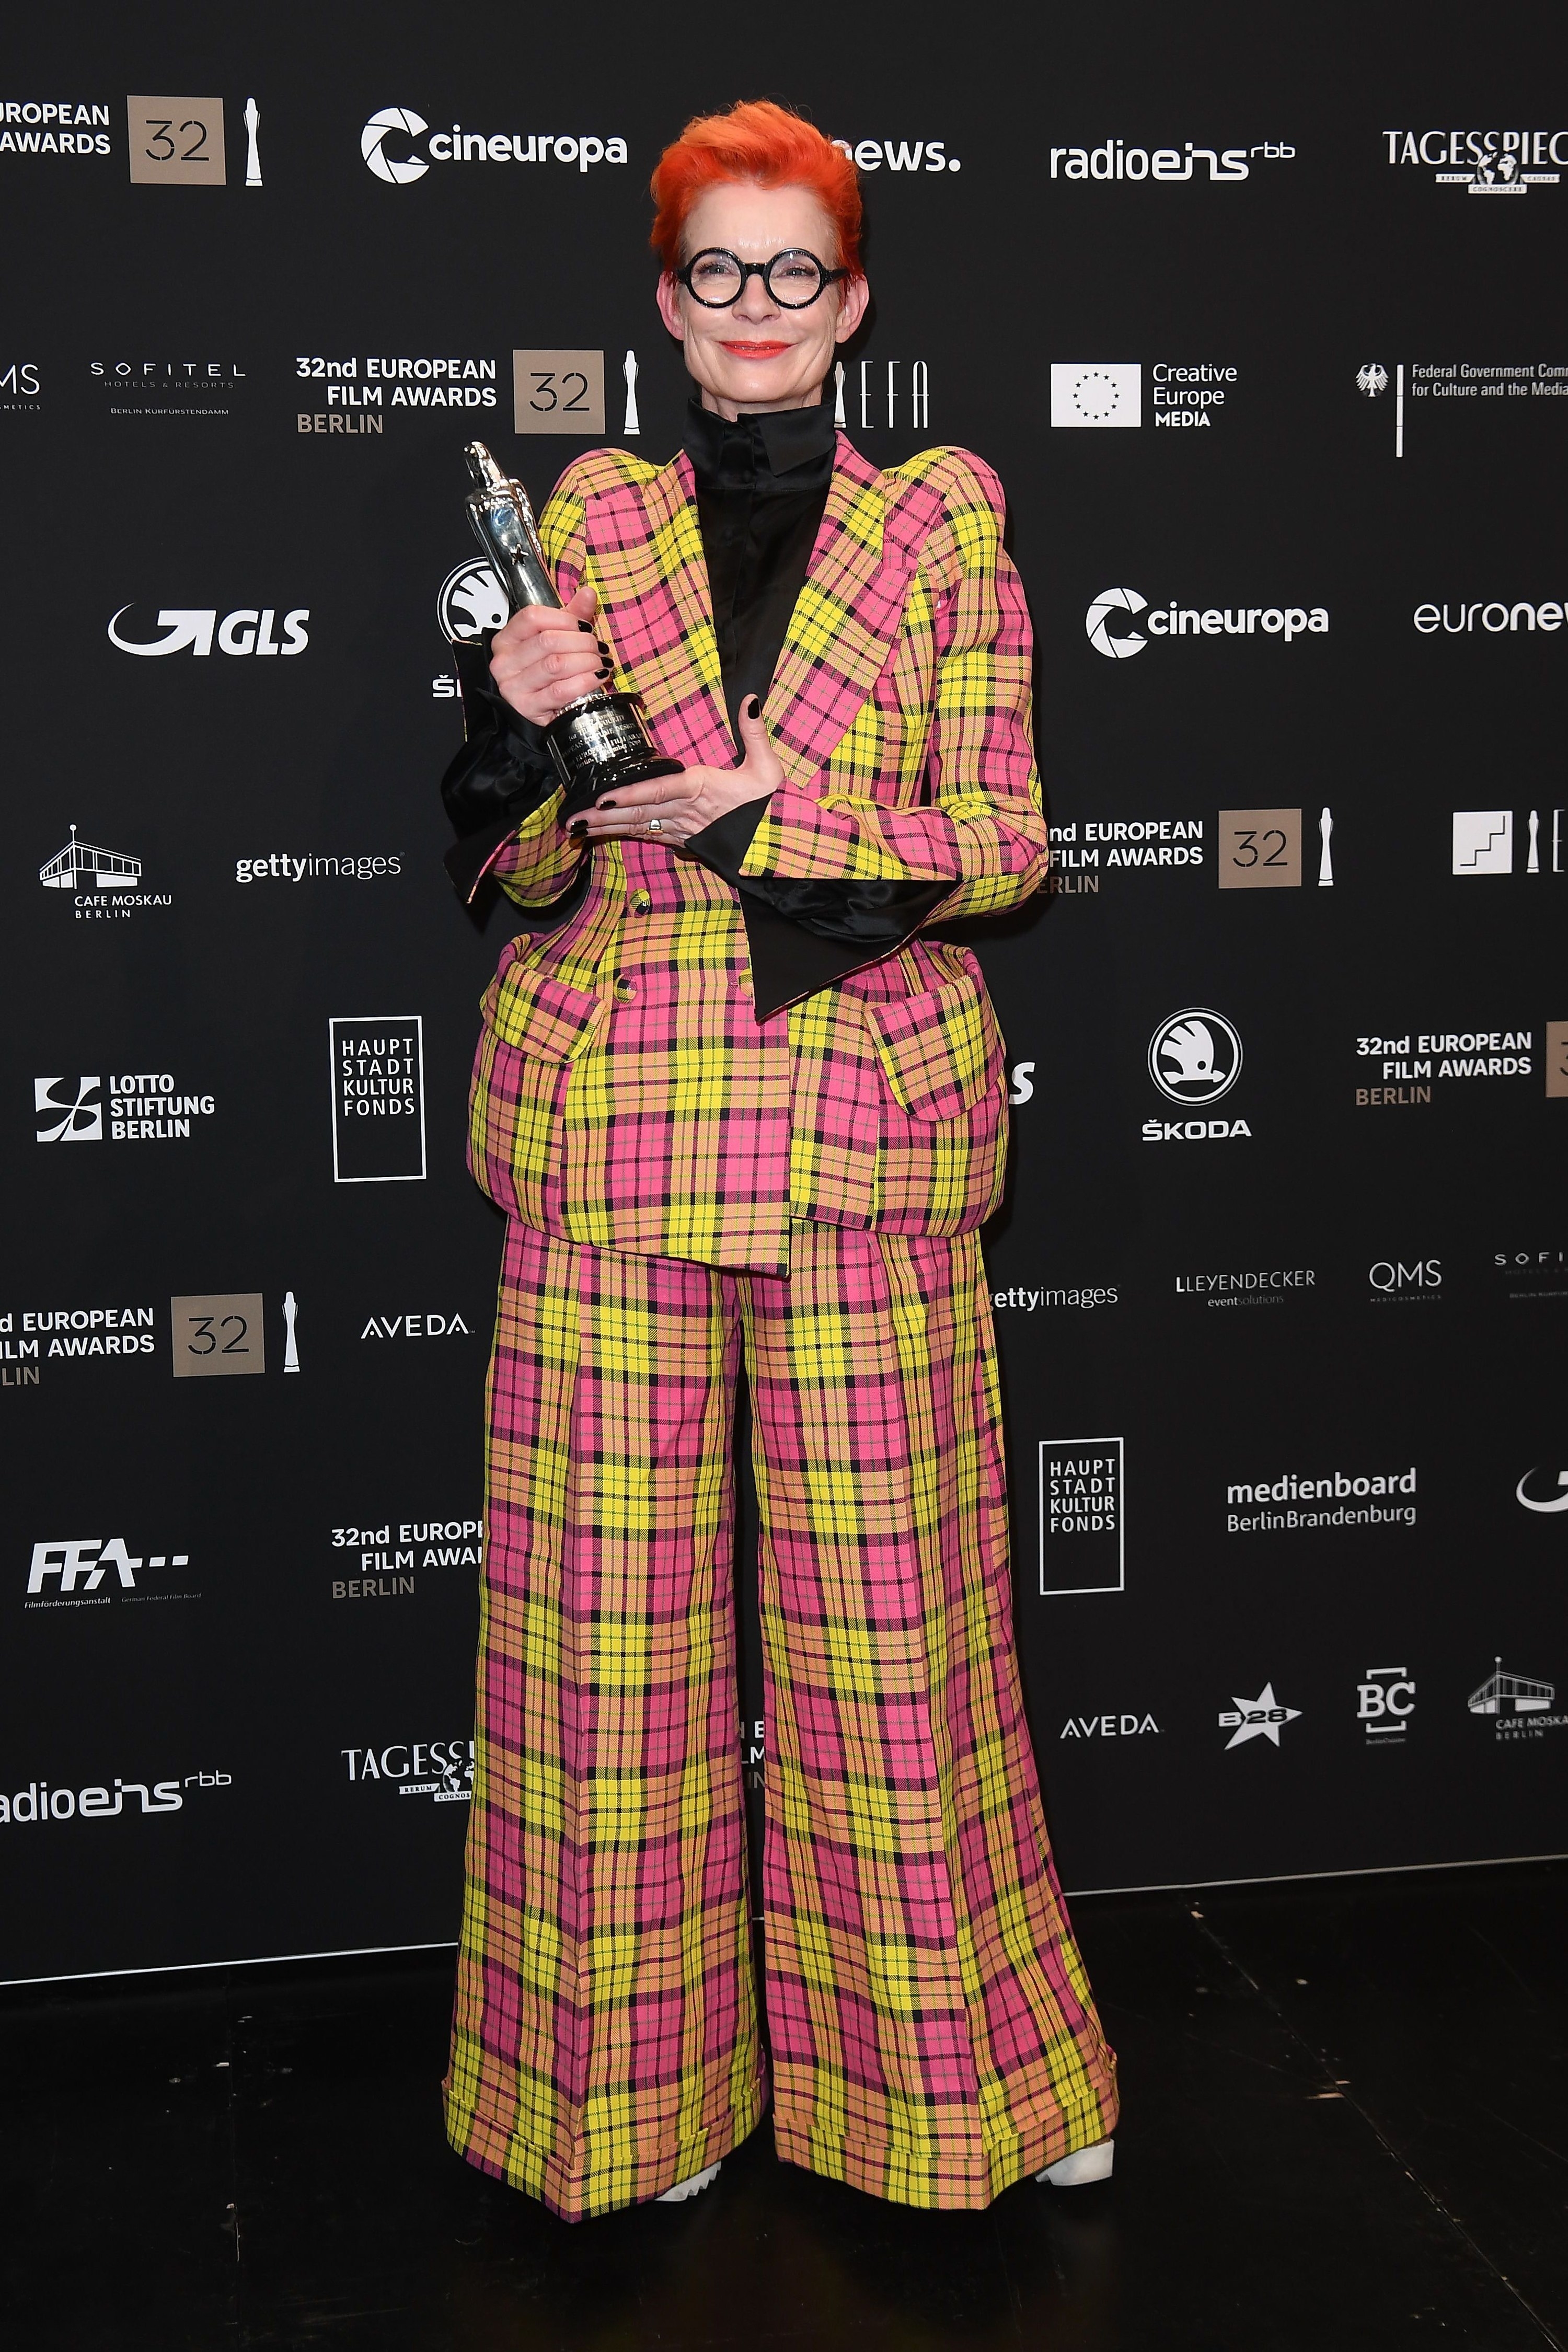 Sandy wears a suit in bright pink and neon yellow plaid, which curves out at the waist. She wears baggy flared trousers in the same pattern.